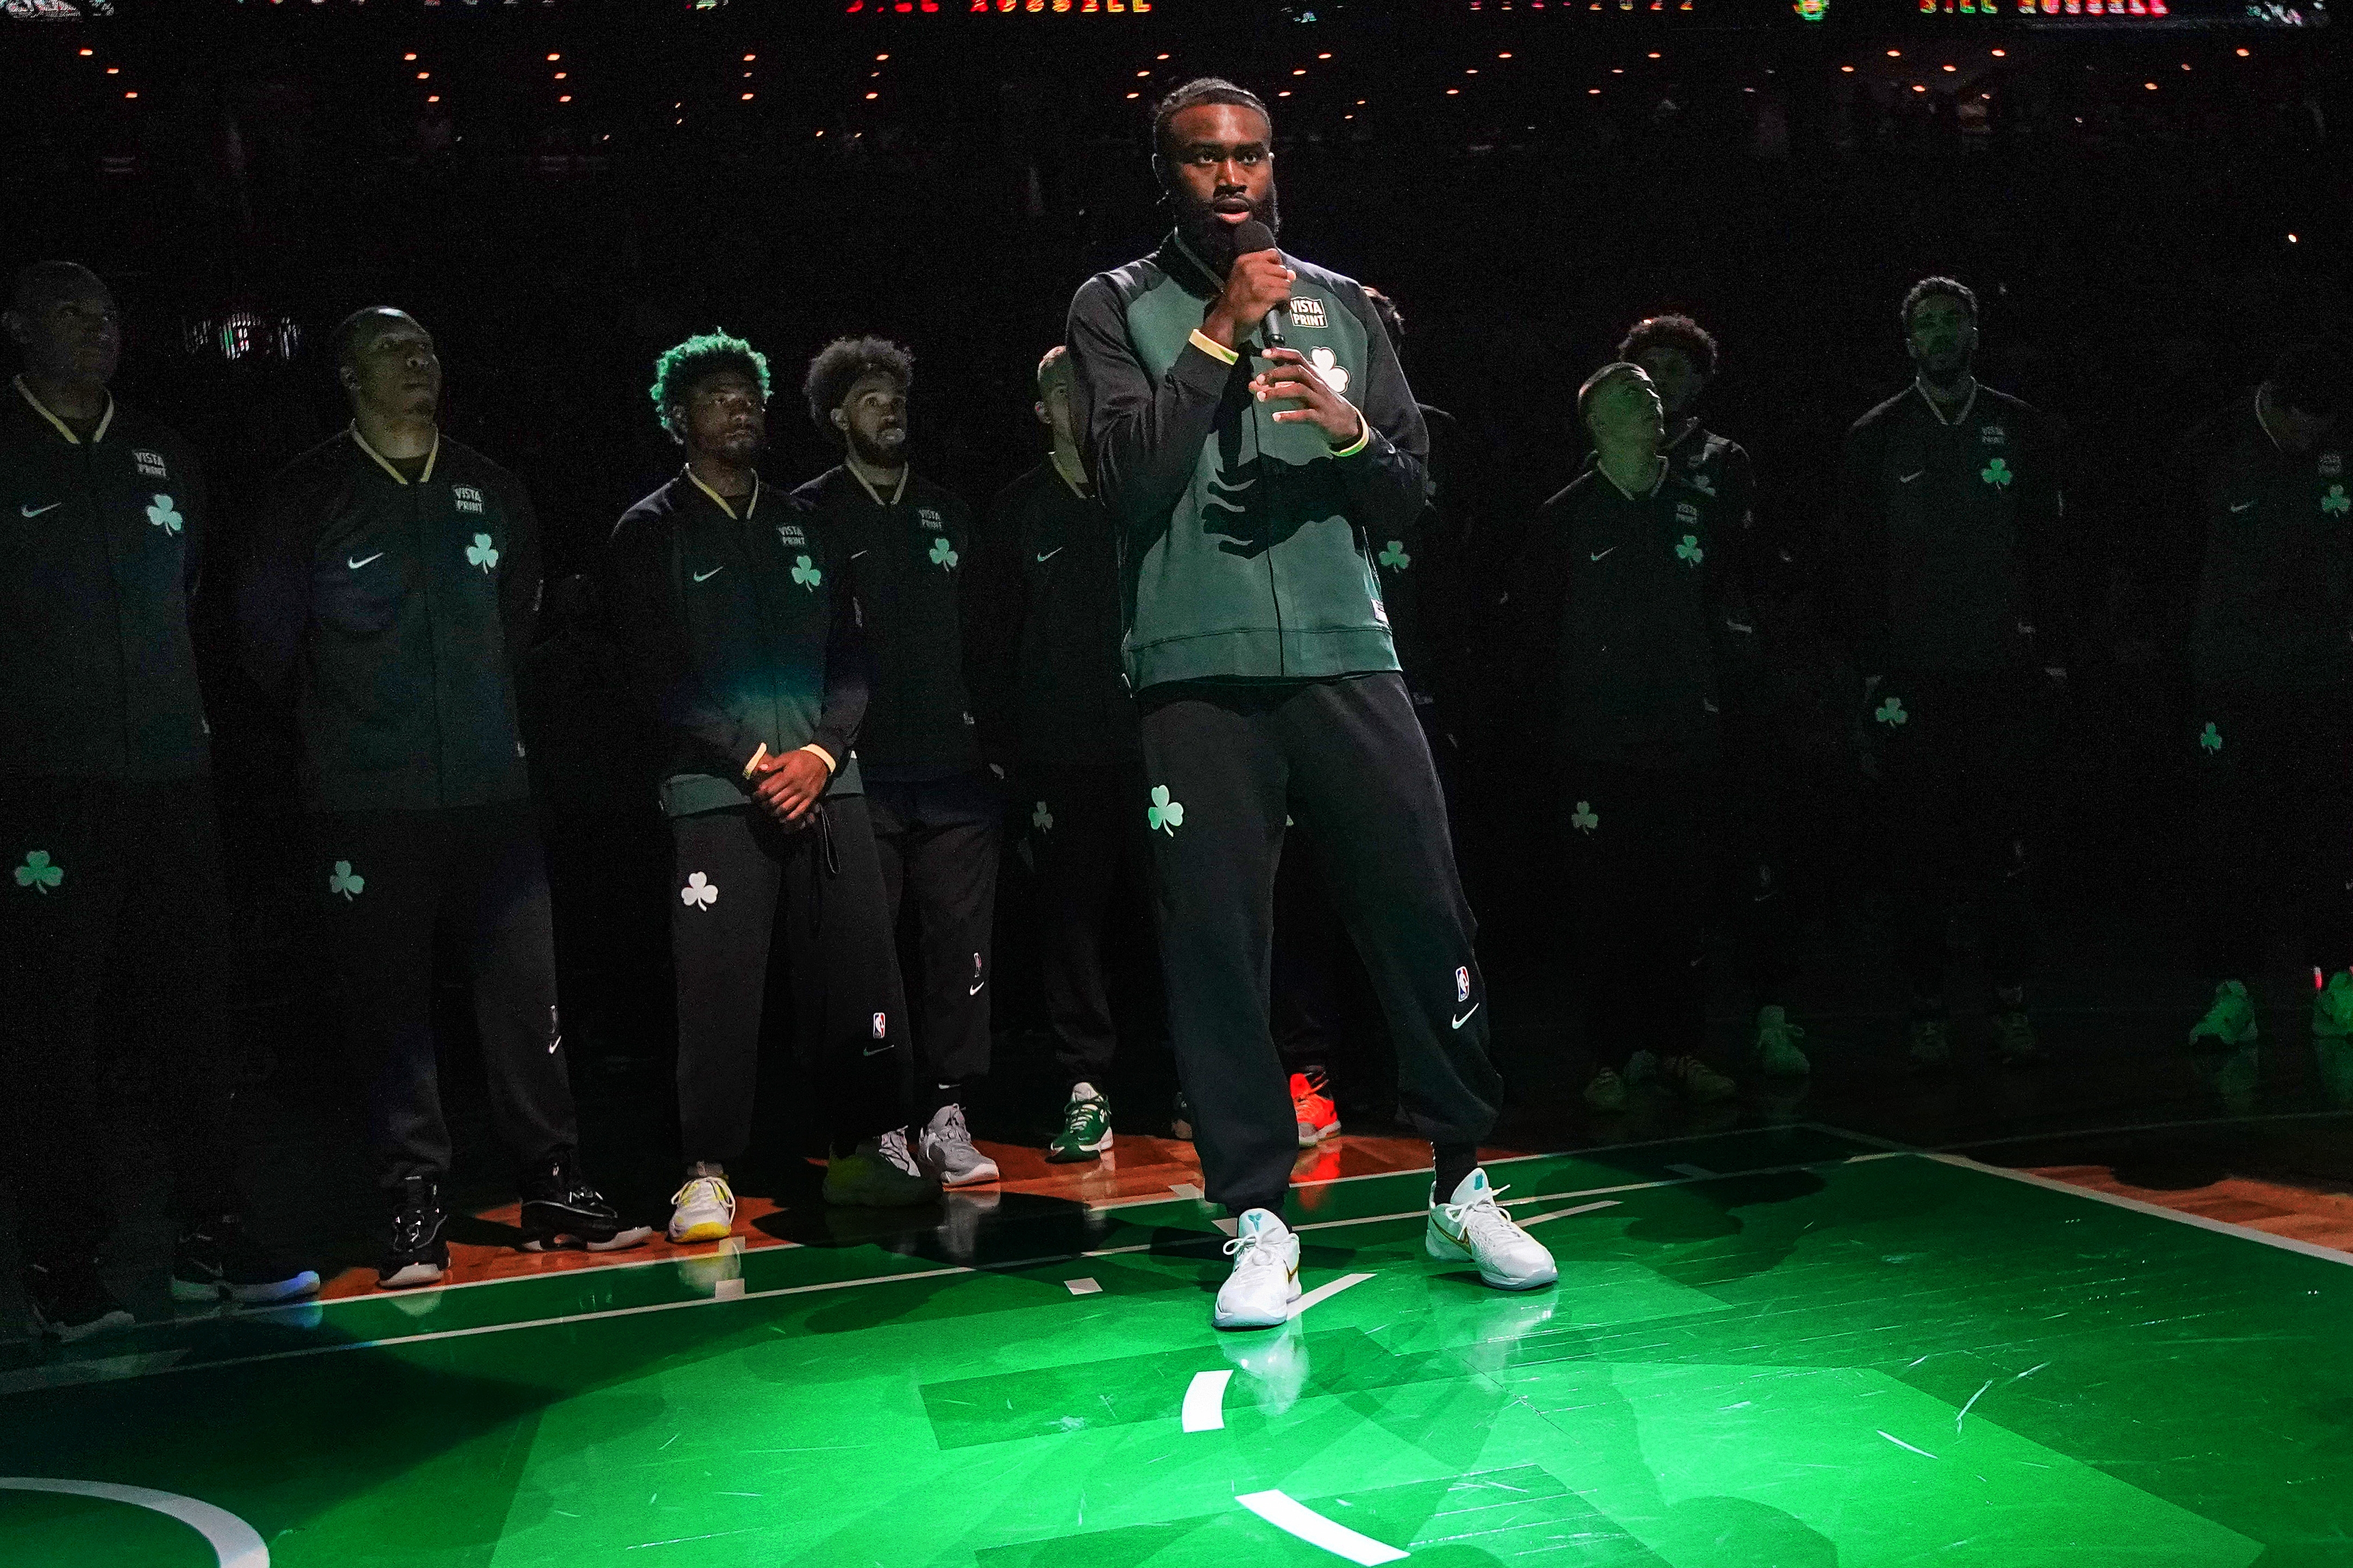 Boston Celtics honor late Bill Russell with special City Edition